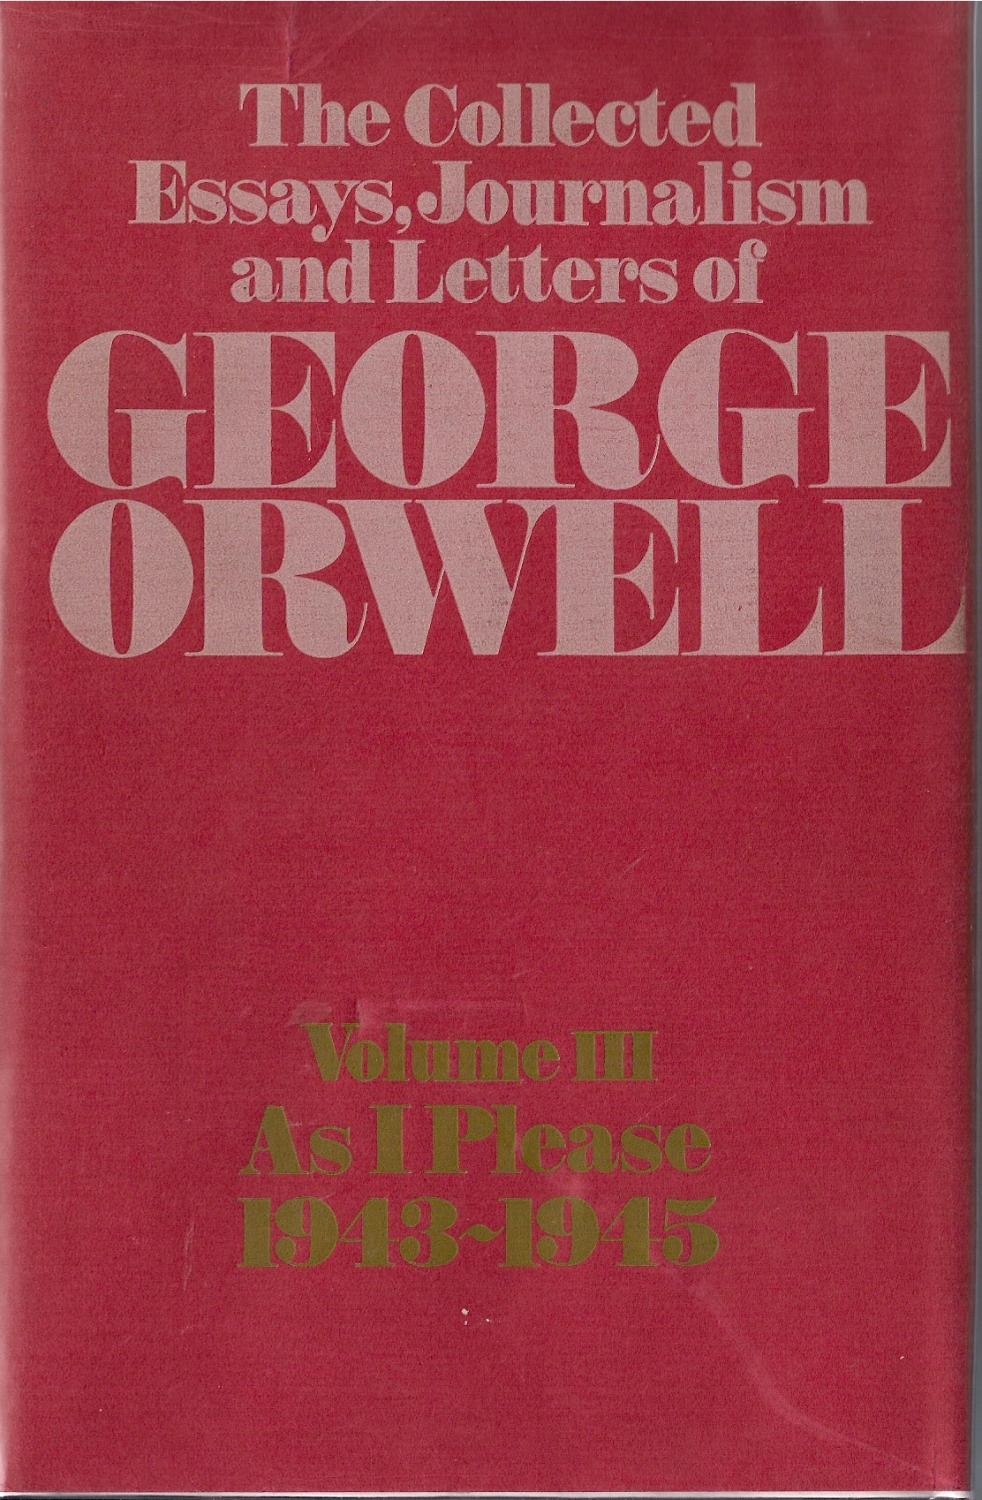 Essay about george orwell writing style